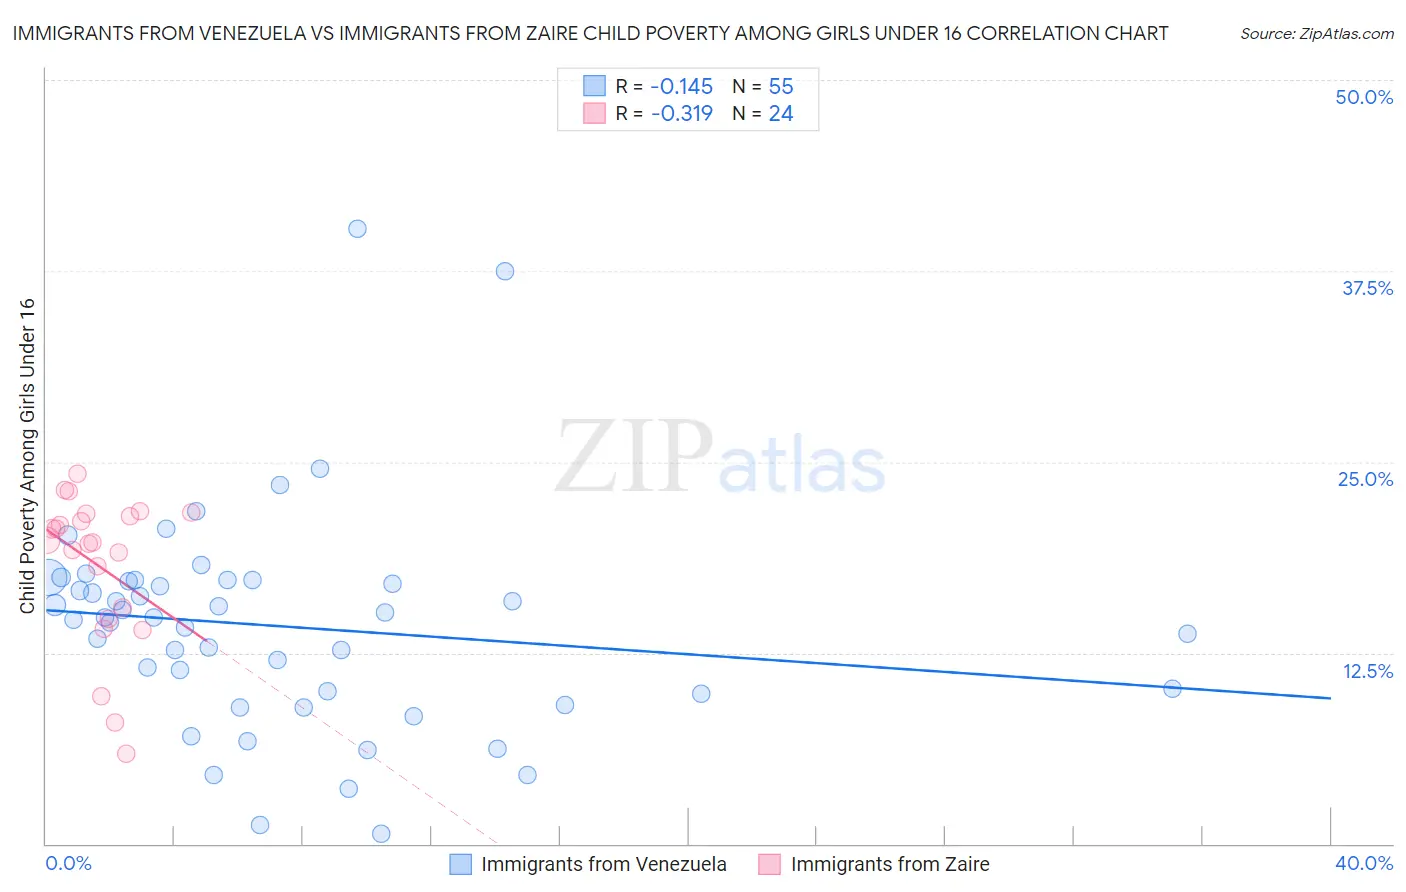 Immigrants from Venezuela vs Immigrants from Zaire Child Poverty Among Girls Under 16